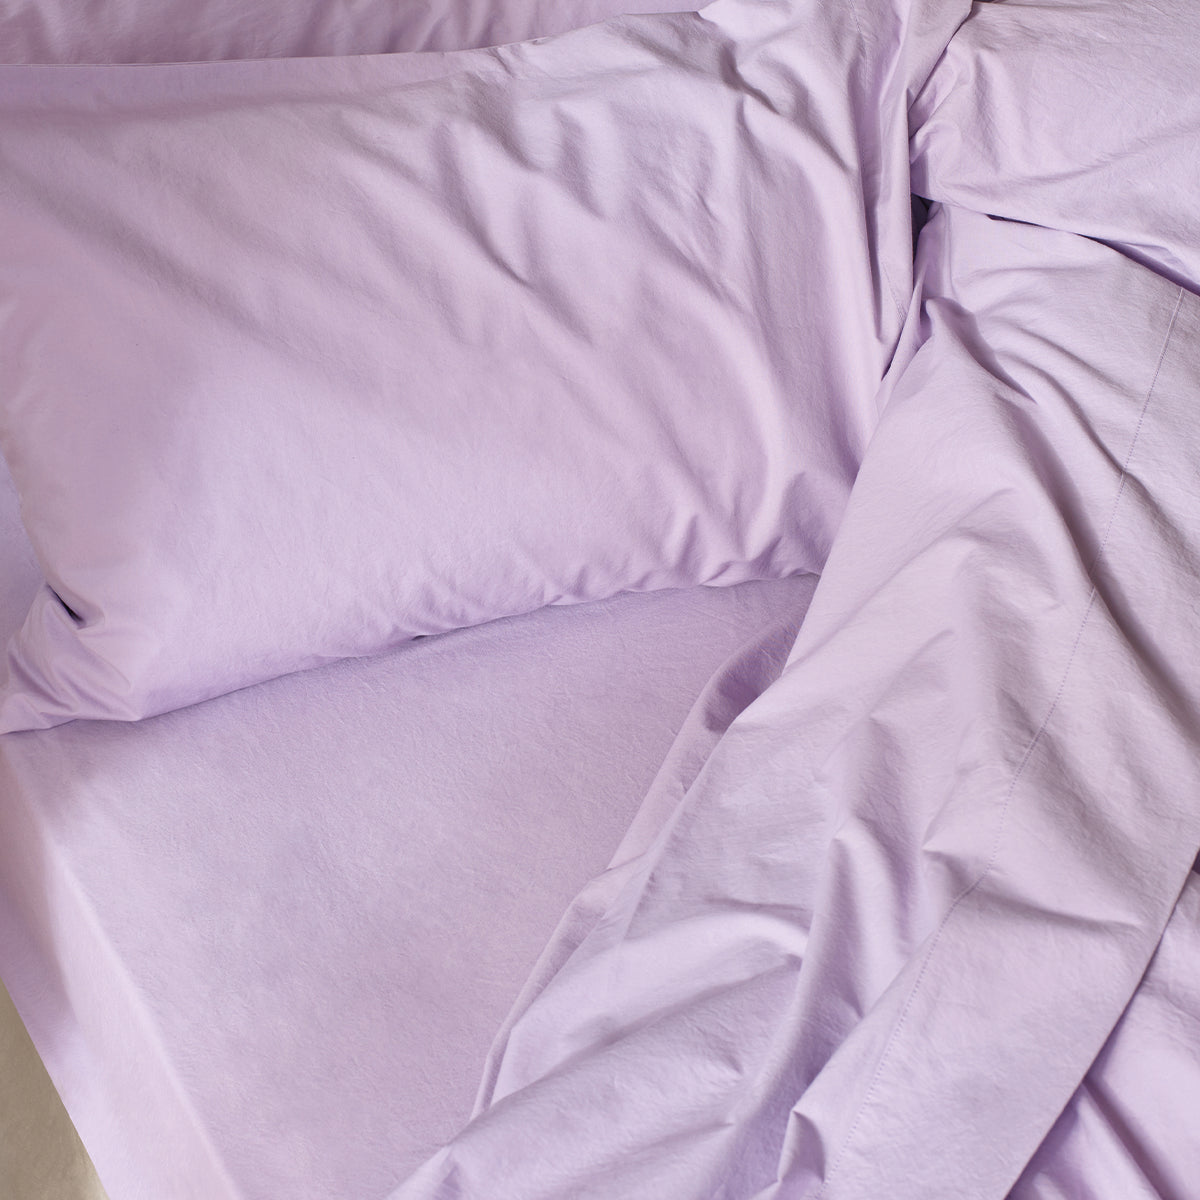 Lavender Washed Cotton Percale Fitted Sheet